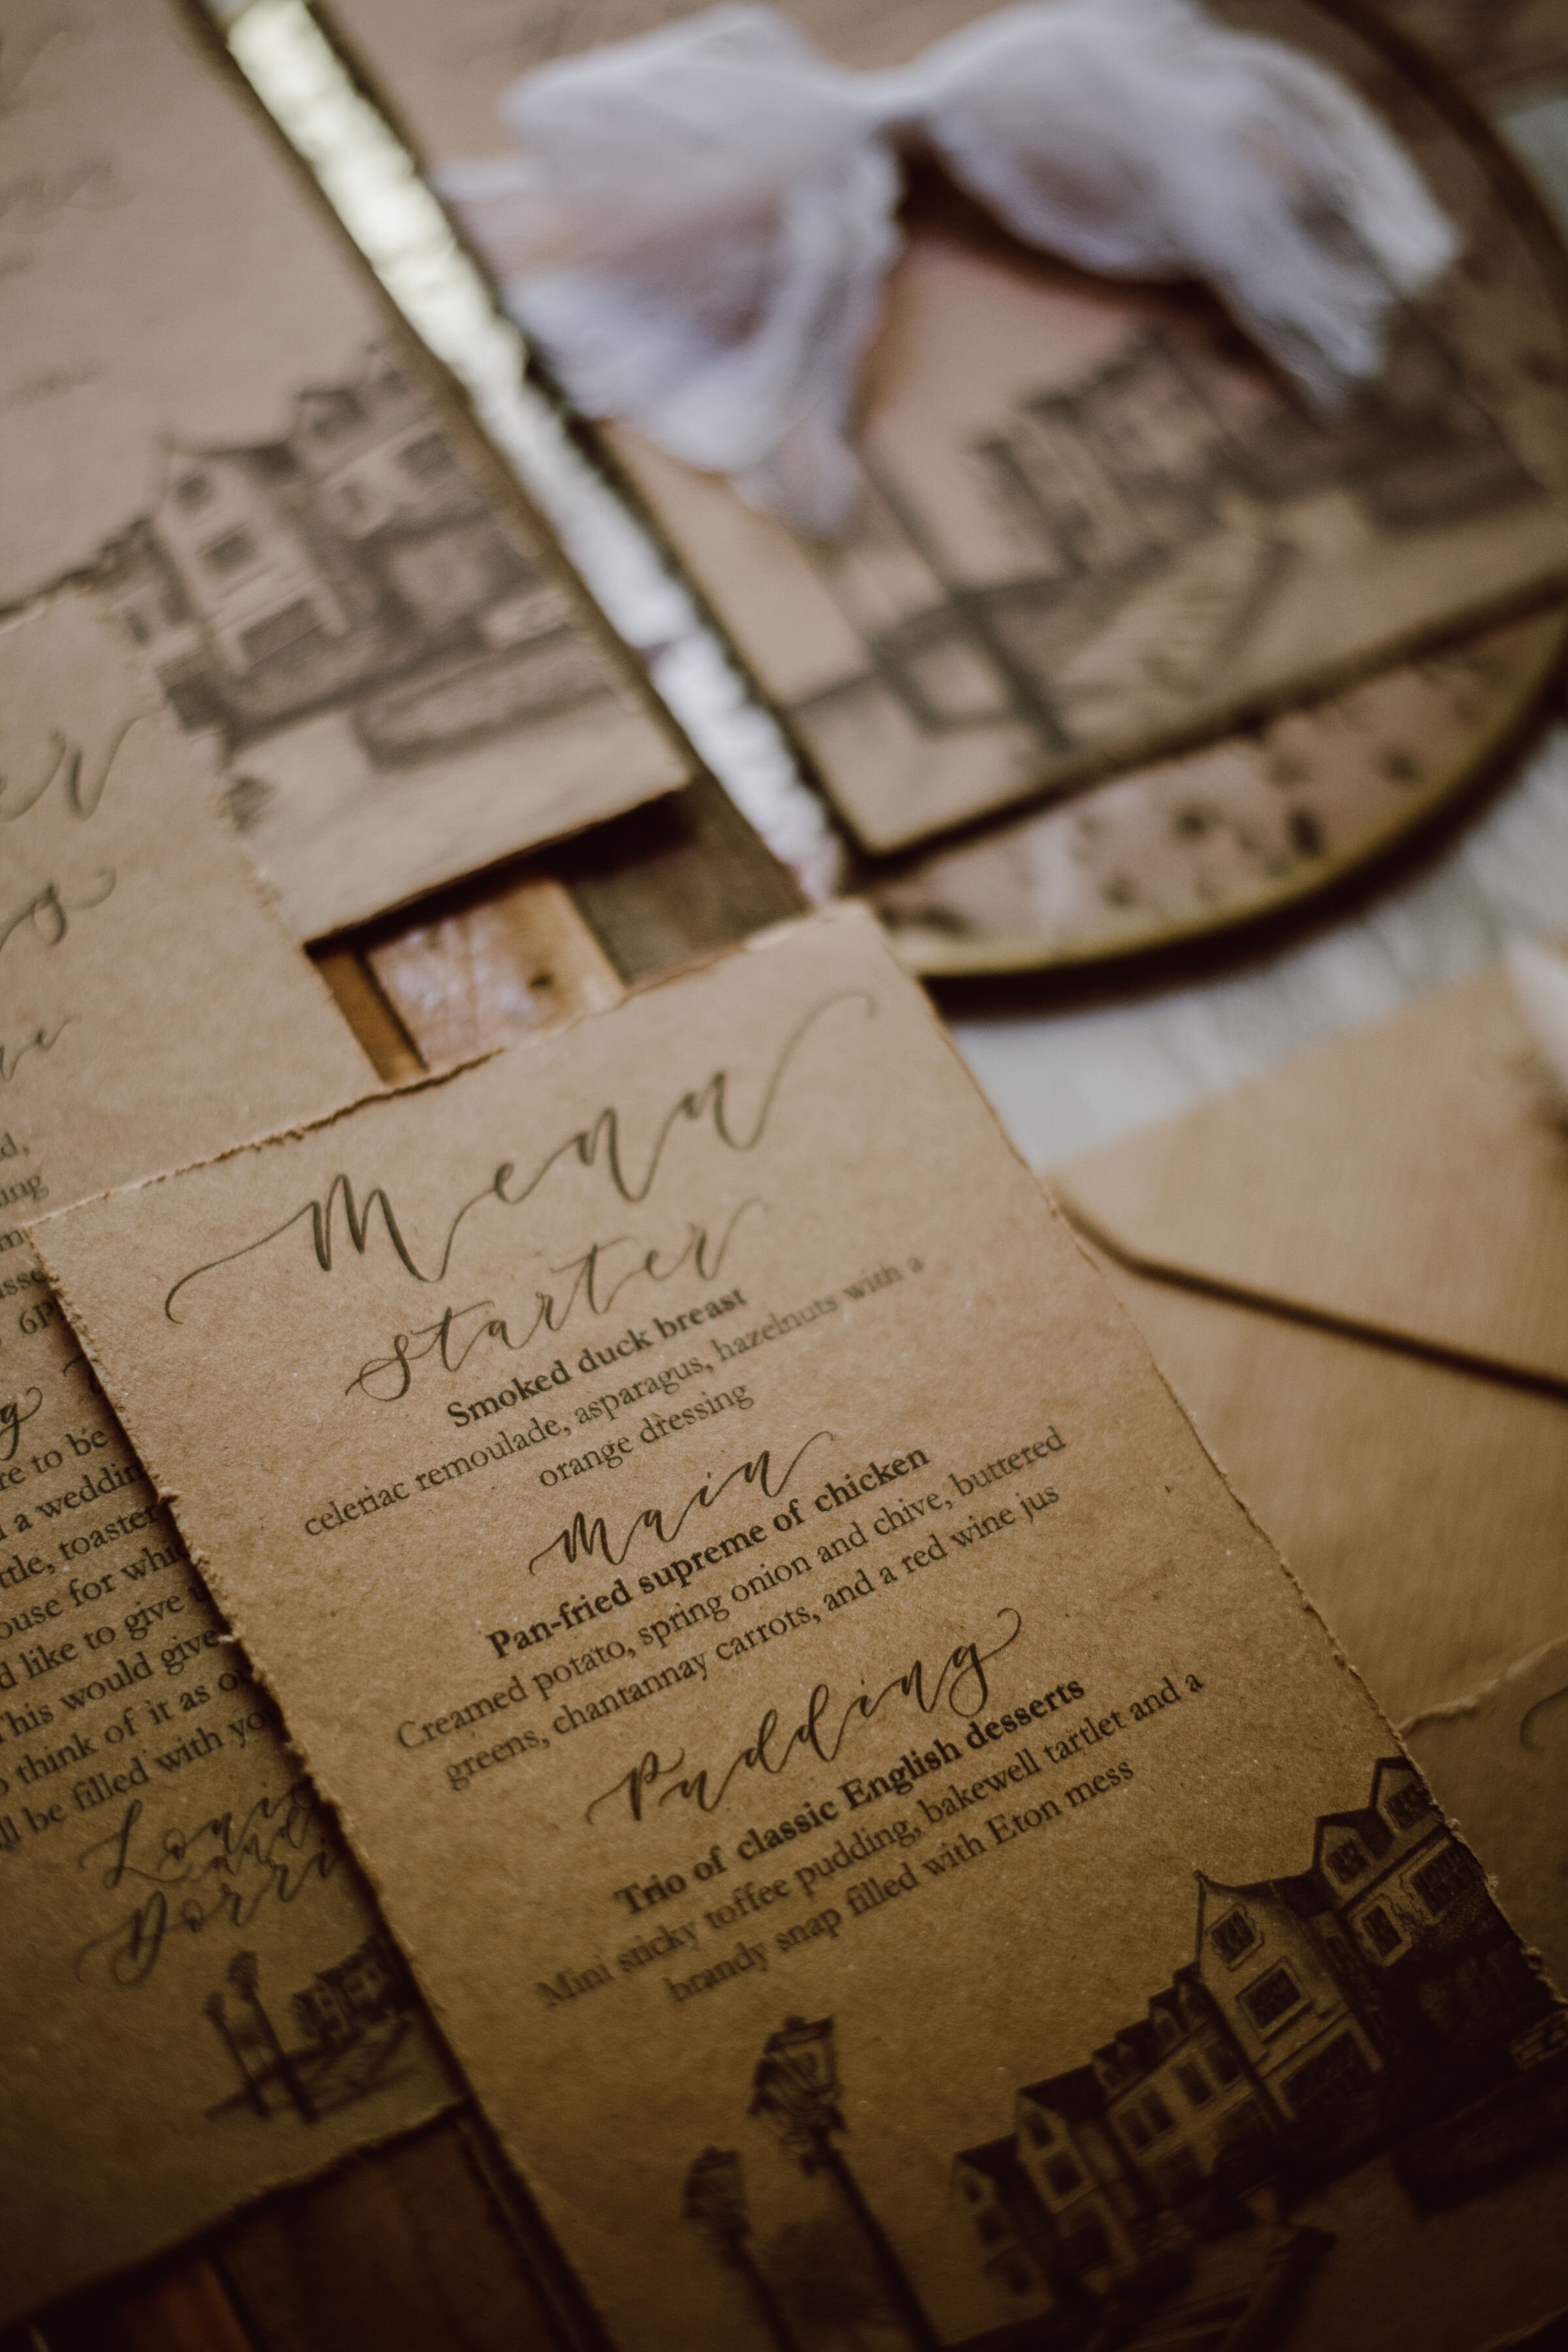 South Lodge recycled paper invites by The Amyverse with illustration and hand-lettered calligraphy.jpg